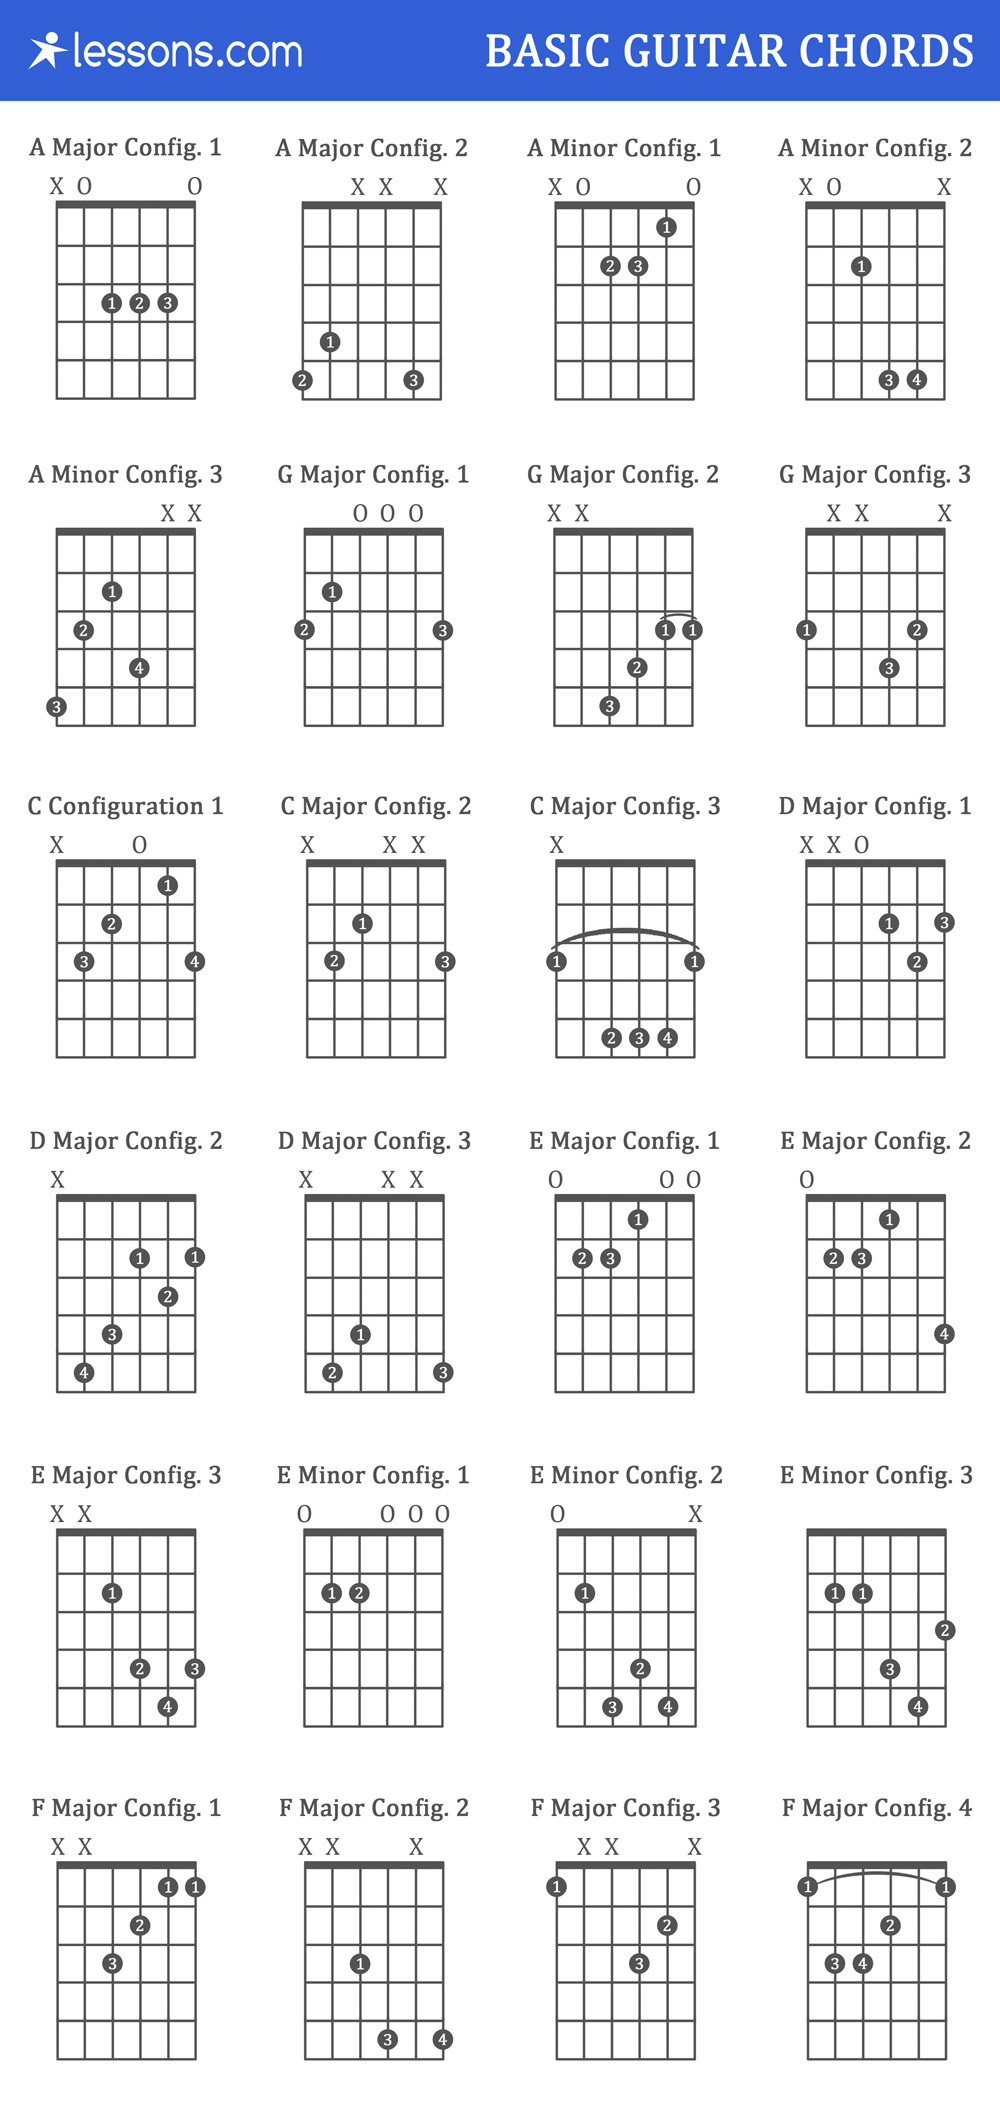 Beginner Guitar Chords The 8 Basic Guitar Chords For Beginners With Charts Examples